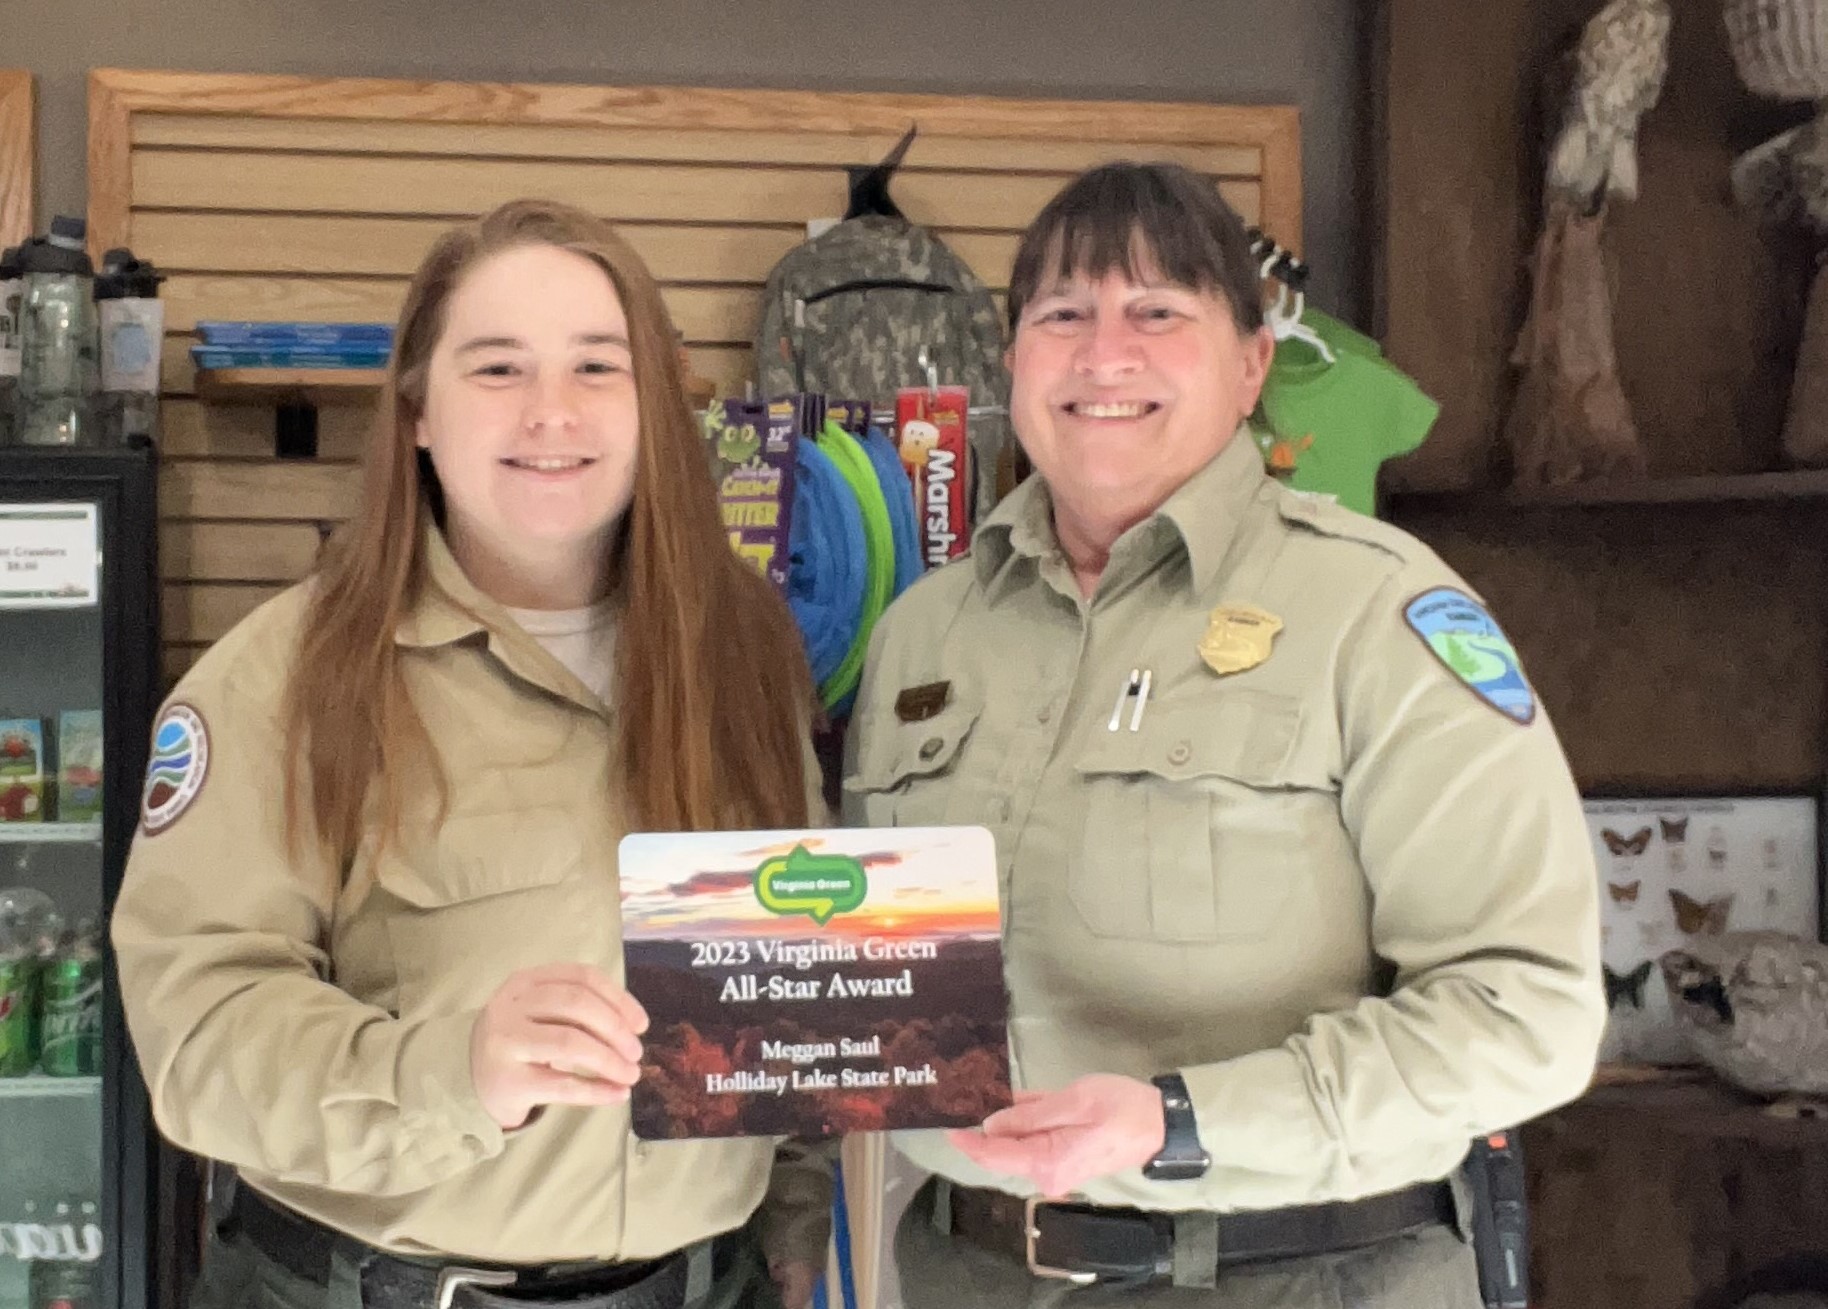 Meggan Saul and Anne Reader at Holliday Lake State Park with award